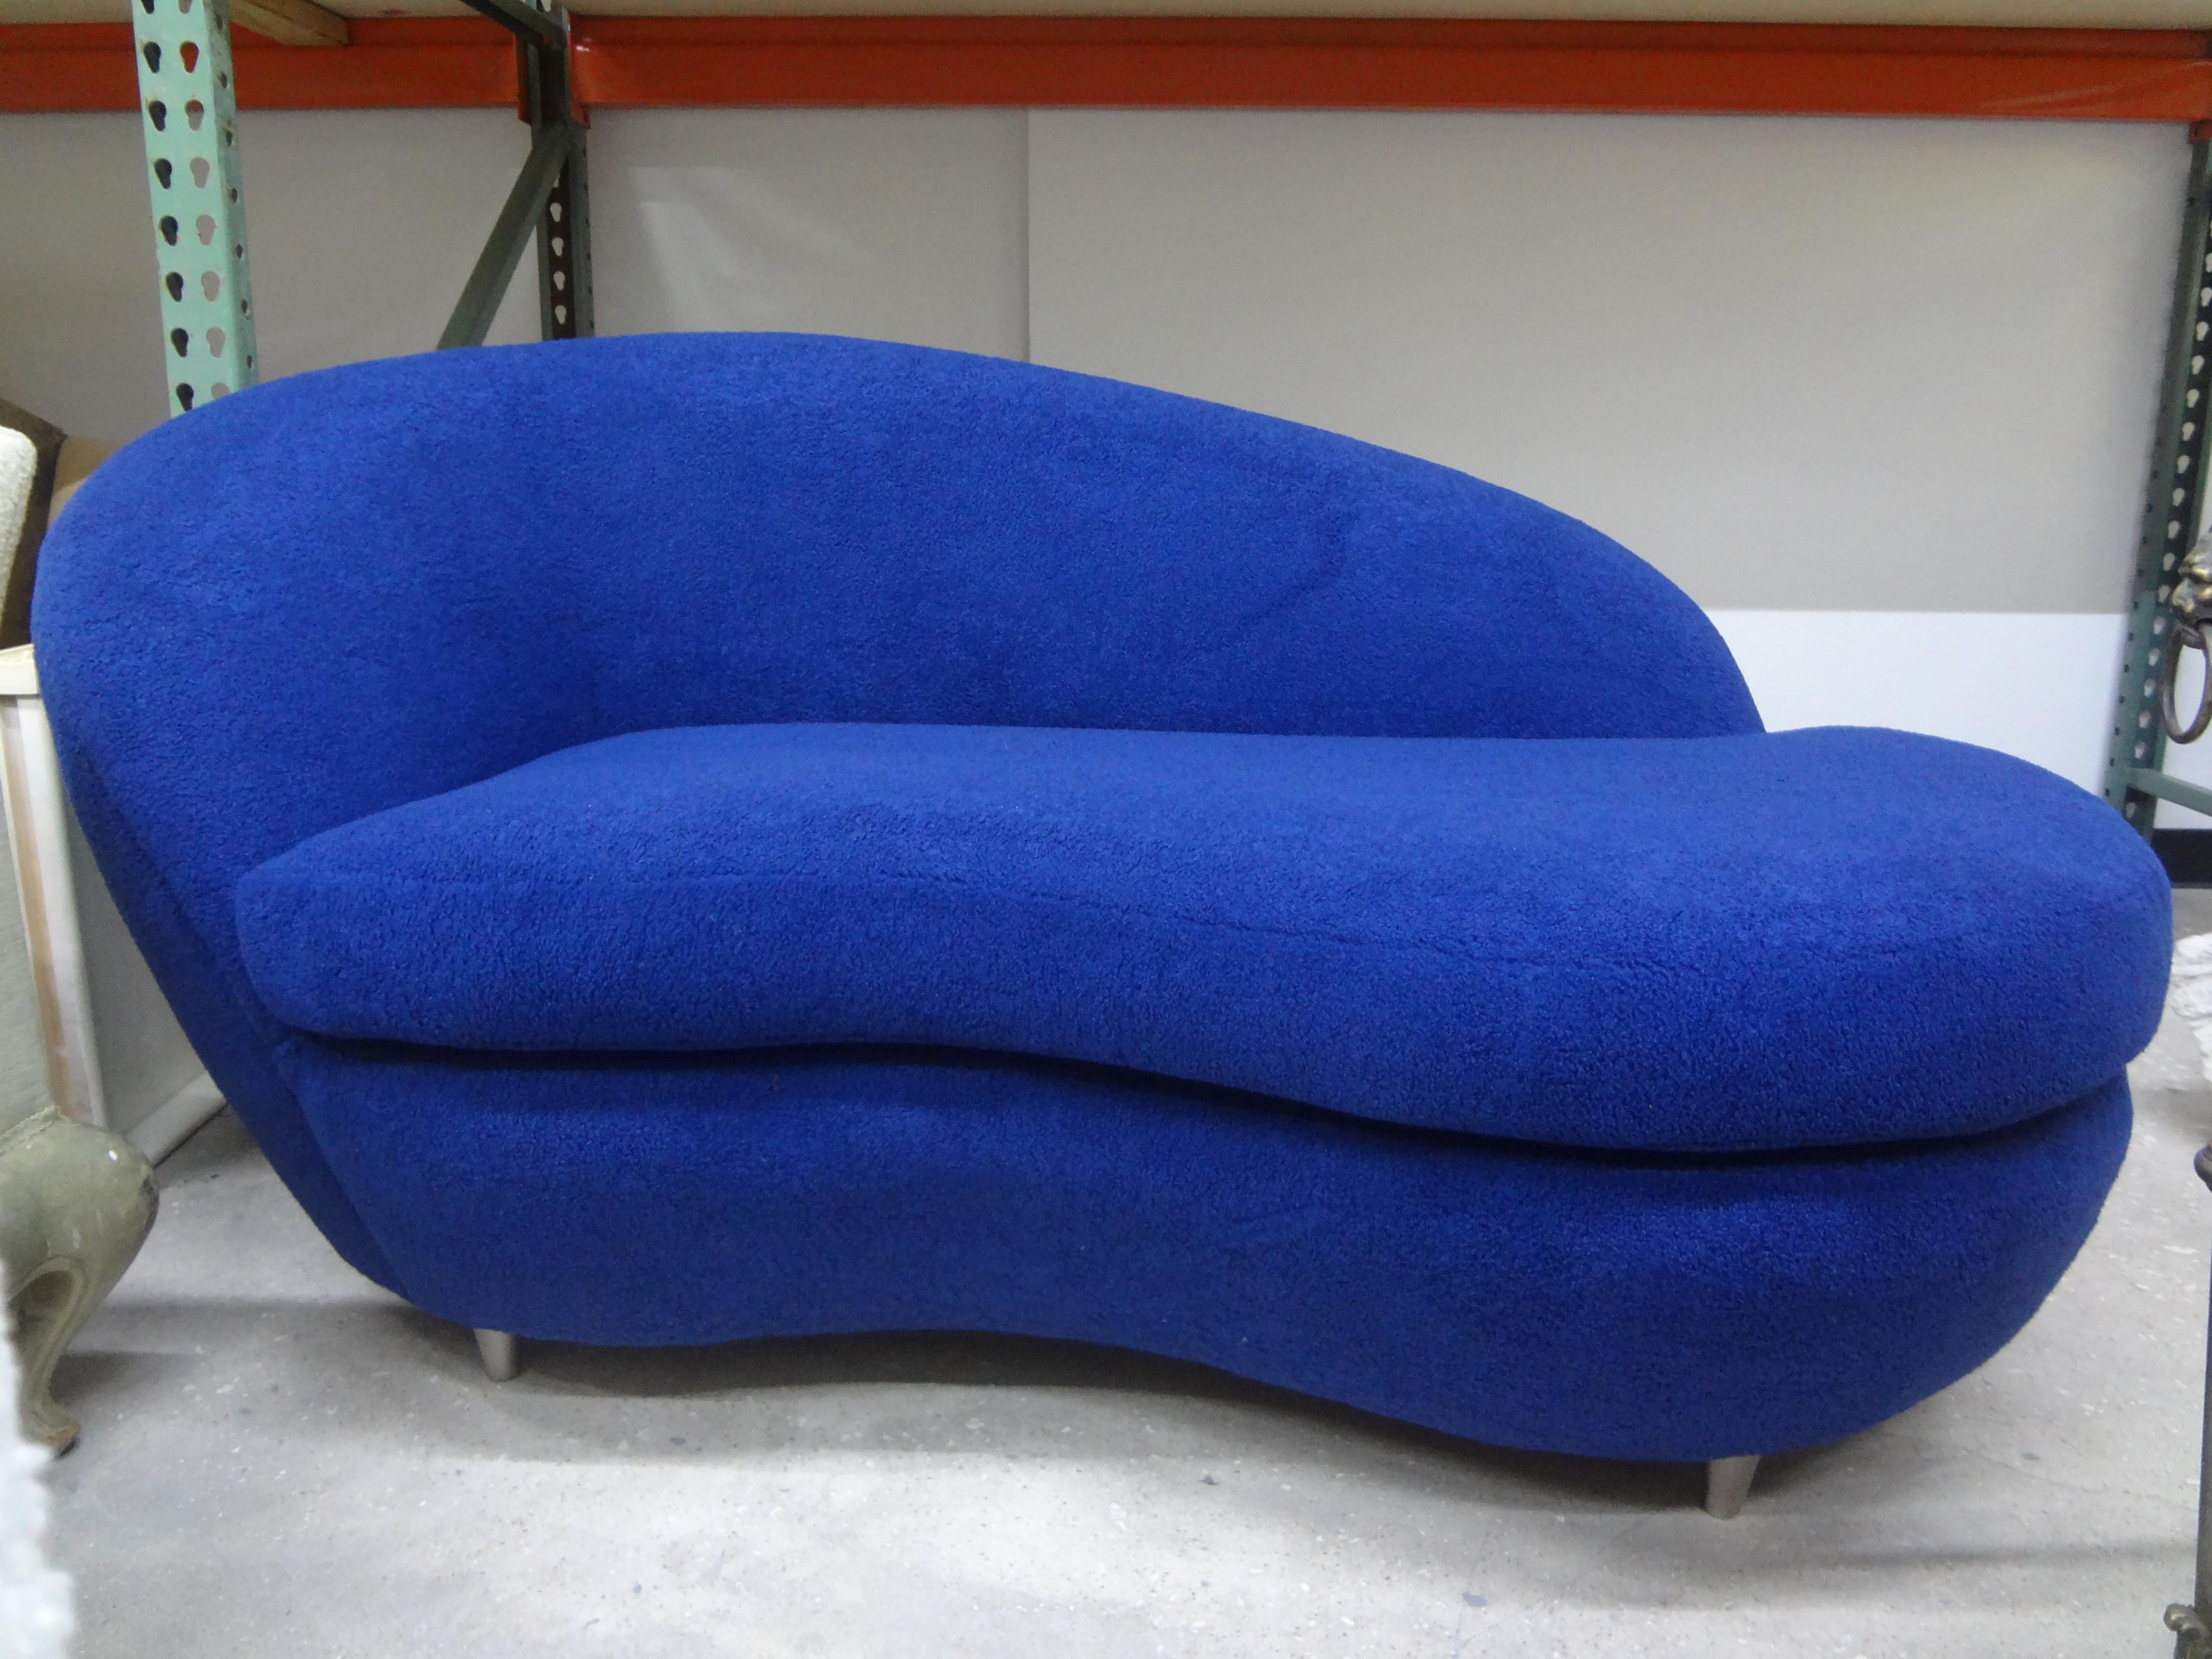 Italian postmodern curved sculptural loveseat or sofa. This stunning Italian Federico Munari inspired sofa, chaise or loveseat has interesting cone shaped stainless steel legs and has been professionally upholstered in plush sapphire blue bouclé